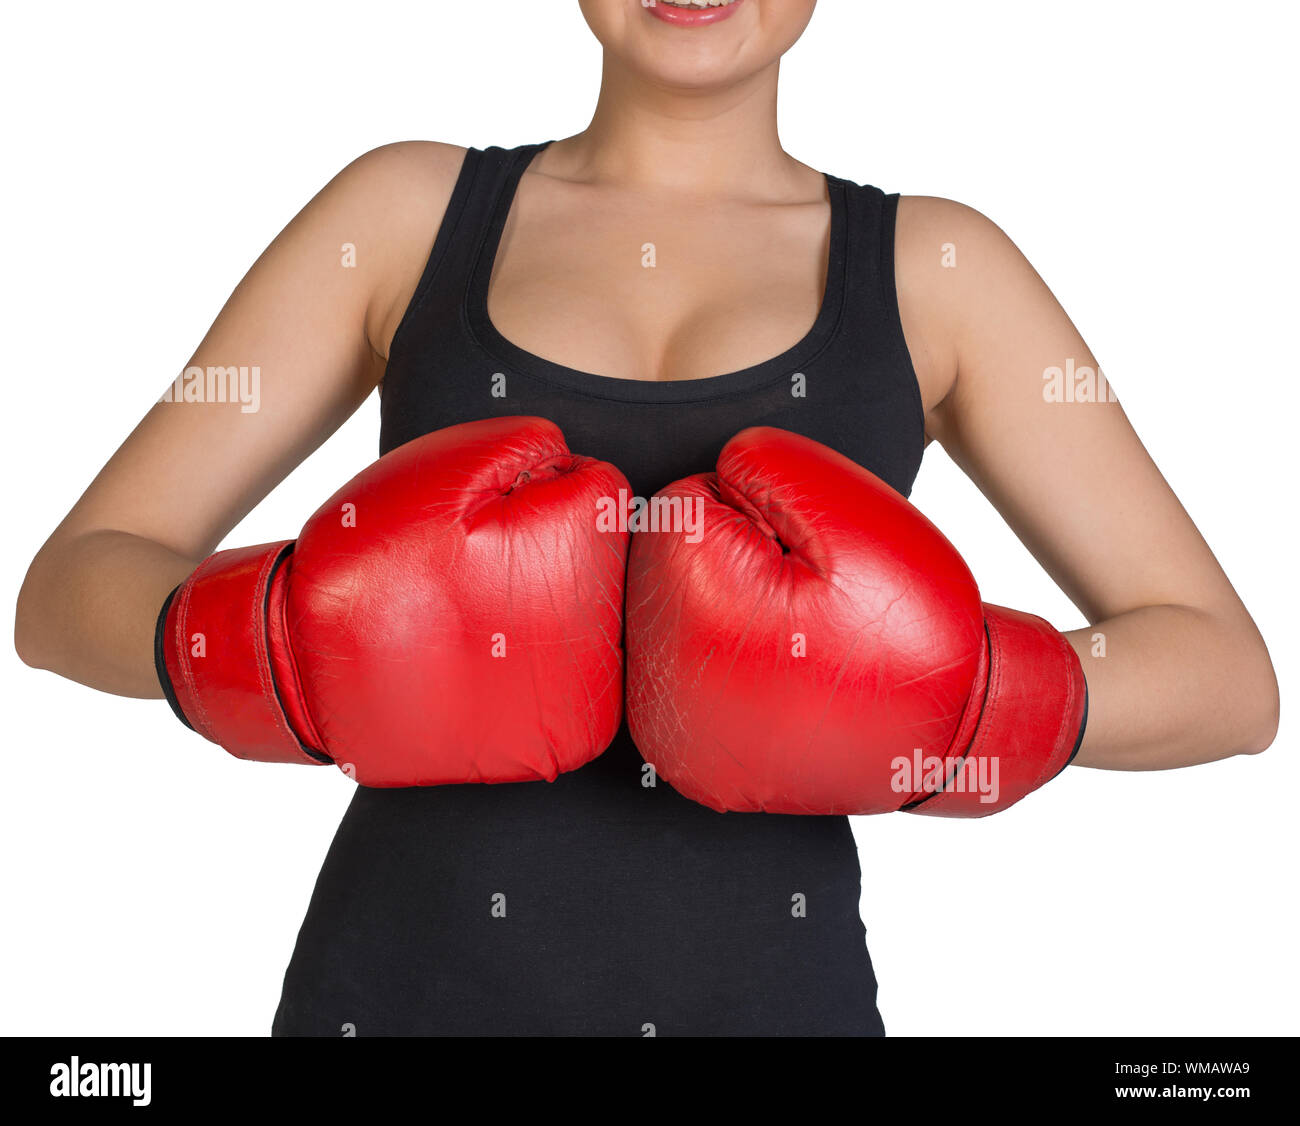 Cropped image of woman in boxing gloves, holding fist to fist. Isolated on white background Stock Photo